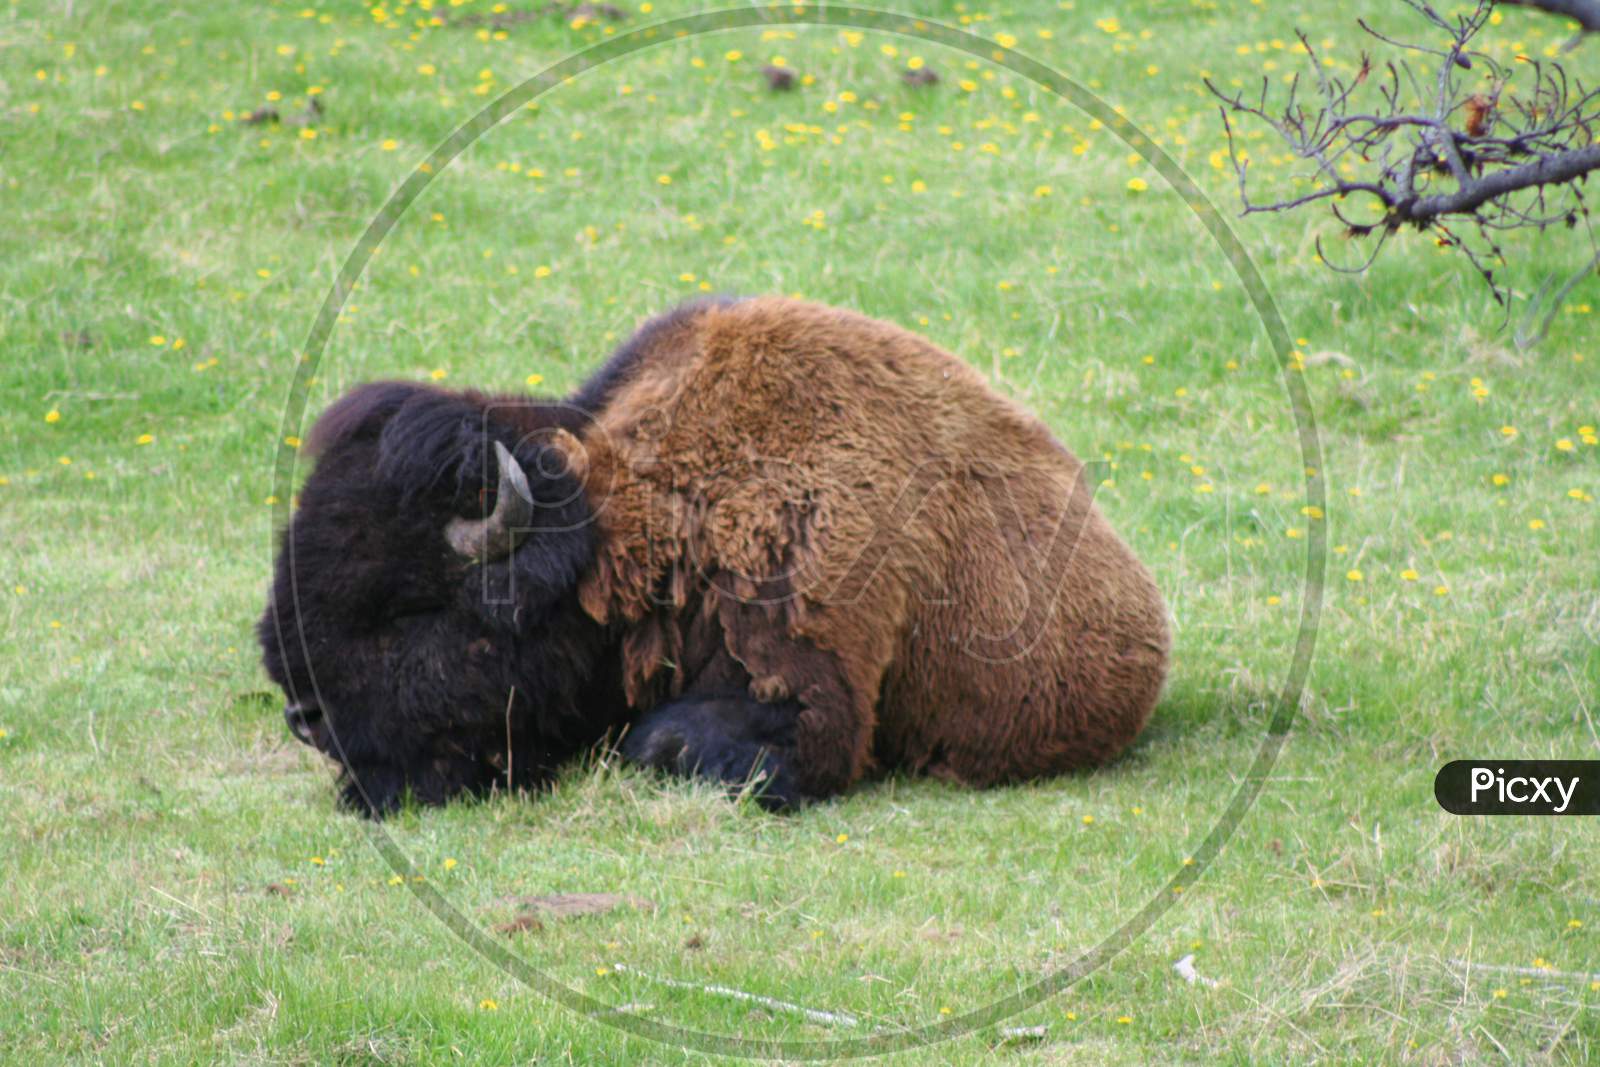 Napping Bison (Wy 00681)